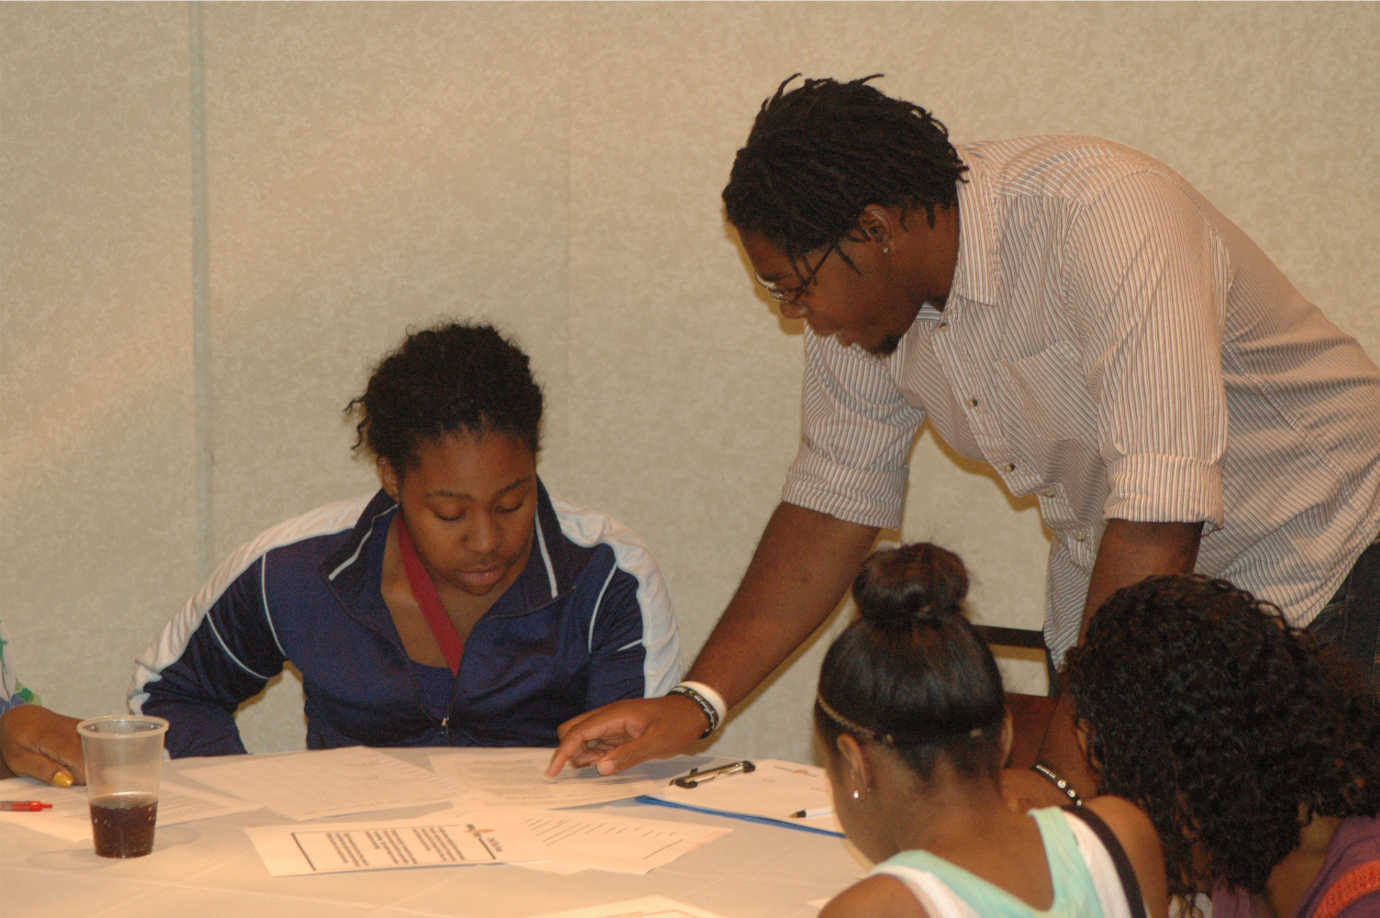 Participants in the Youth Leadership Program participate in a workshop. BCRI focuses on the students’ personal development, helping them gain confidence and leadership ability, as well as improving their public speaking skills. Image courtesy of the Birmingham Civil Rights Institute.